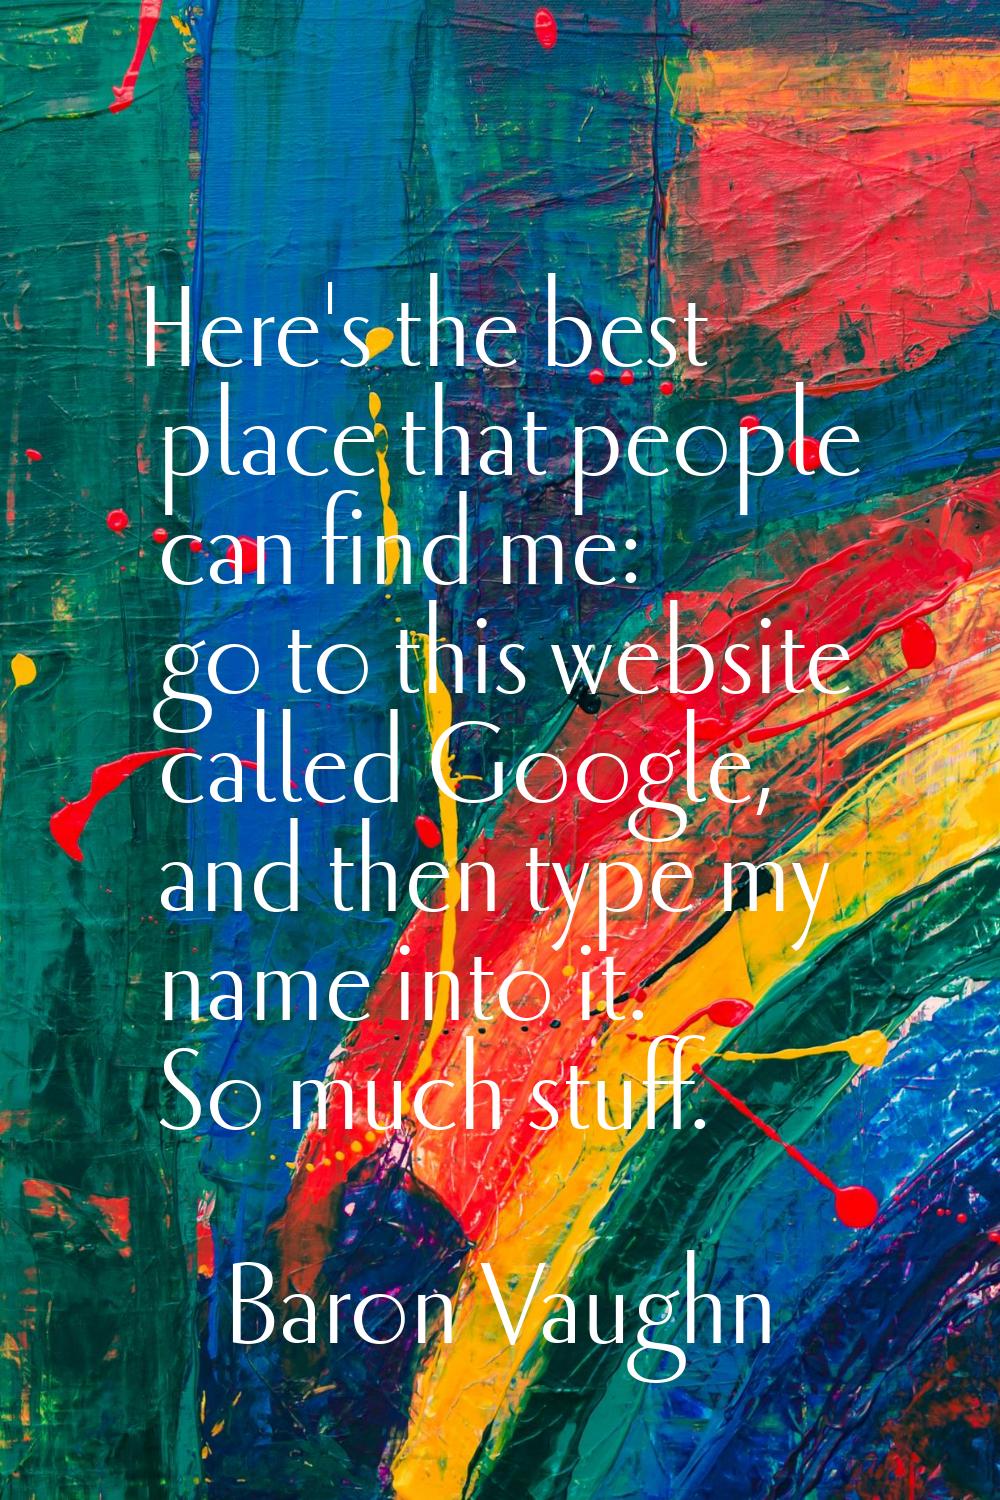 Here's the best place that people can find me: go to this website called Google, and then type my n